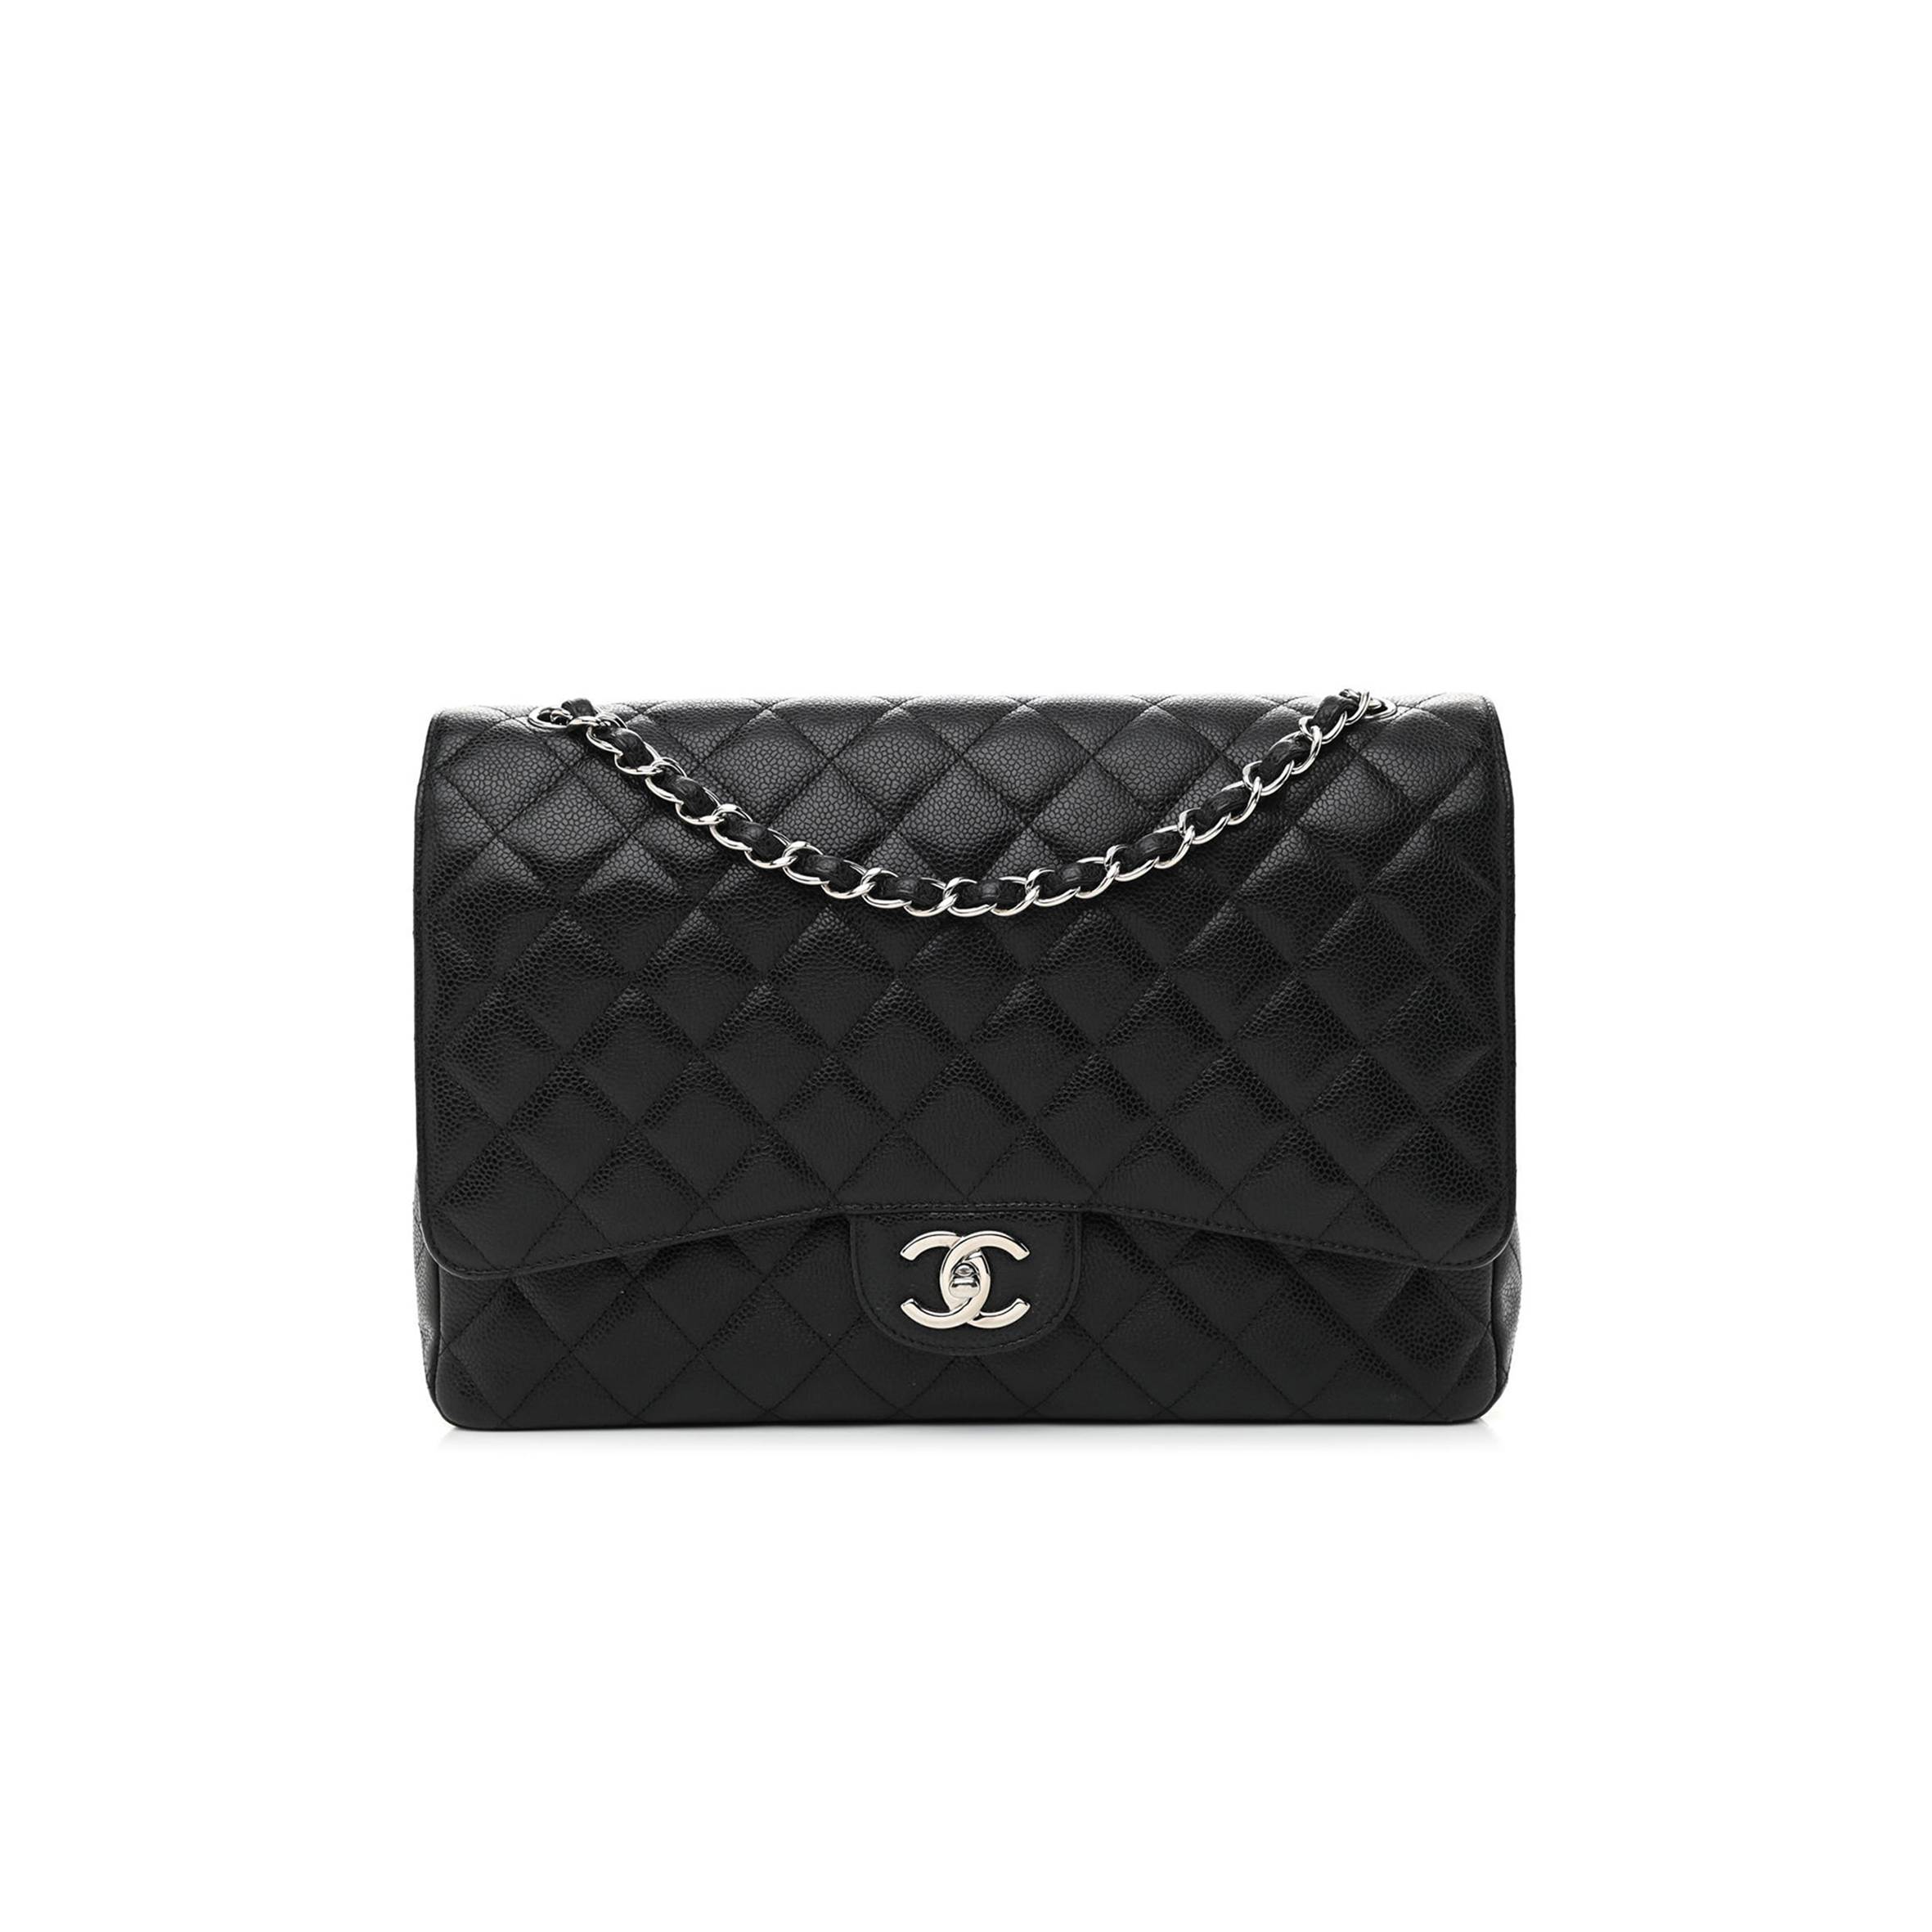 CHANEL CAVIAR QUILTED MAXI DOUBLE FLAP BLACK SILVER HARDWARE (33*24*9cm)